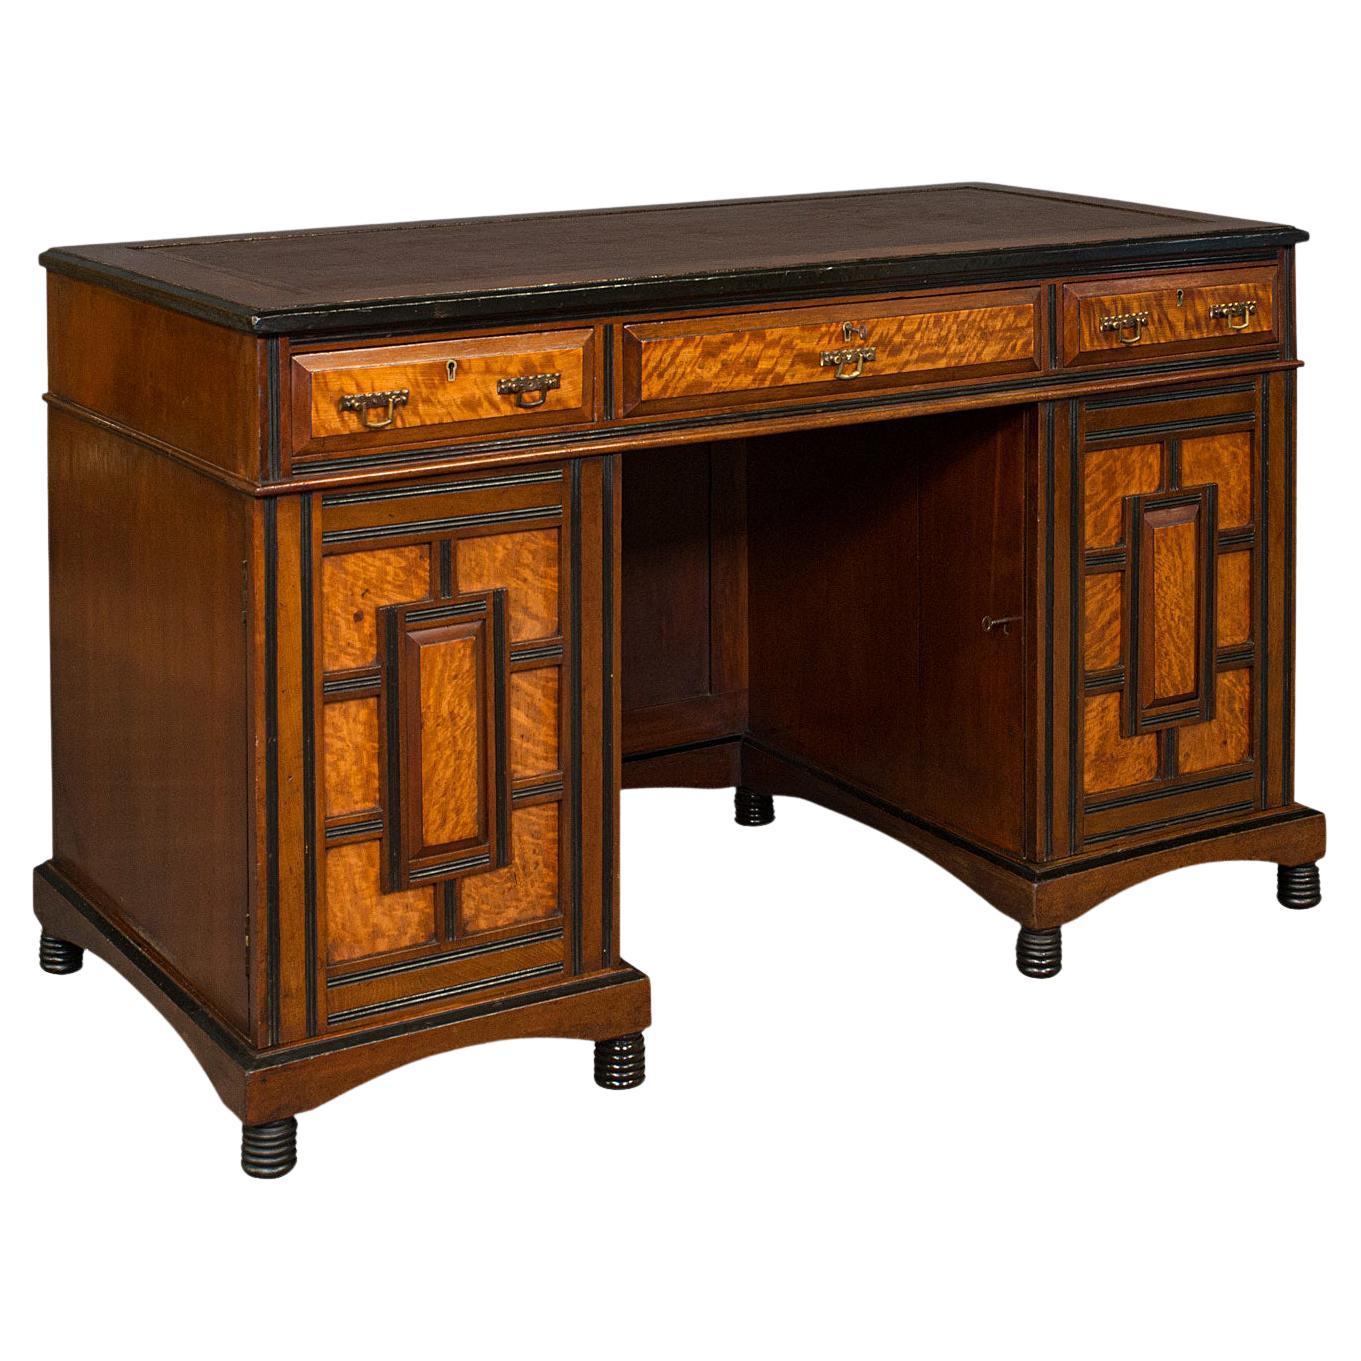 Antique Ladies Morning Room Desk, English, Writing Table, Aesthetic Period, 1880 For Sale